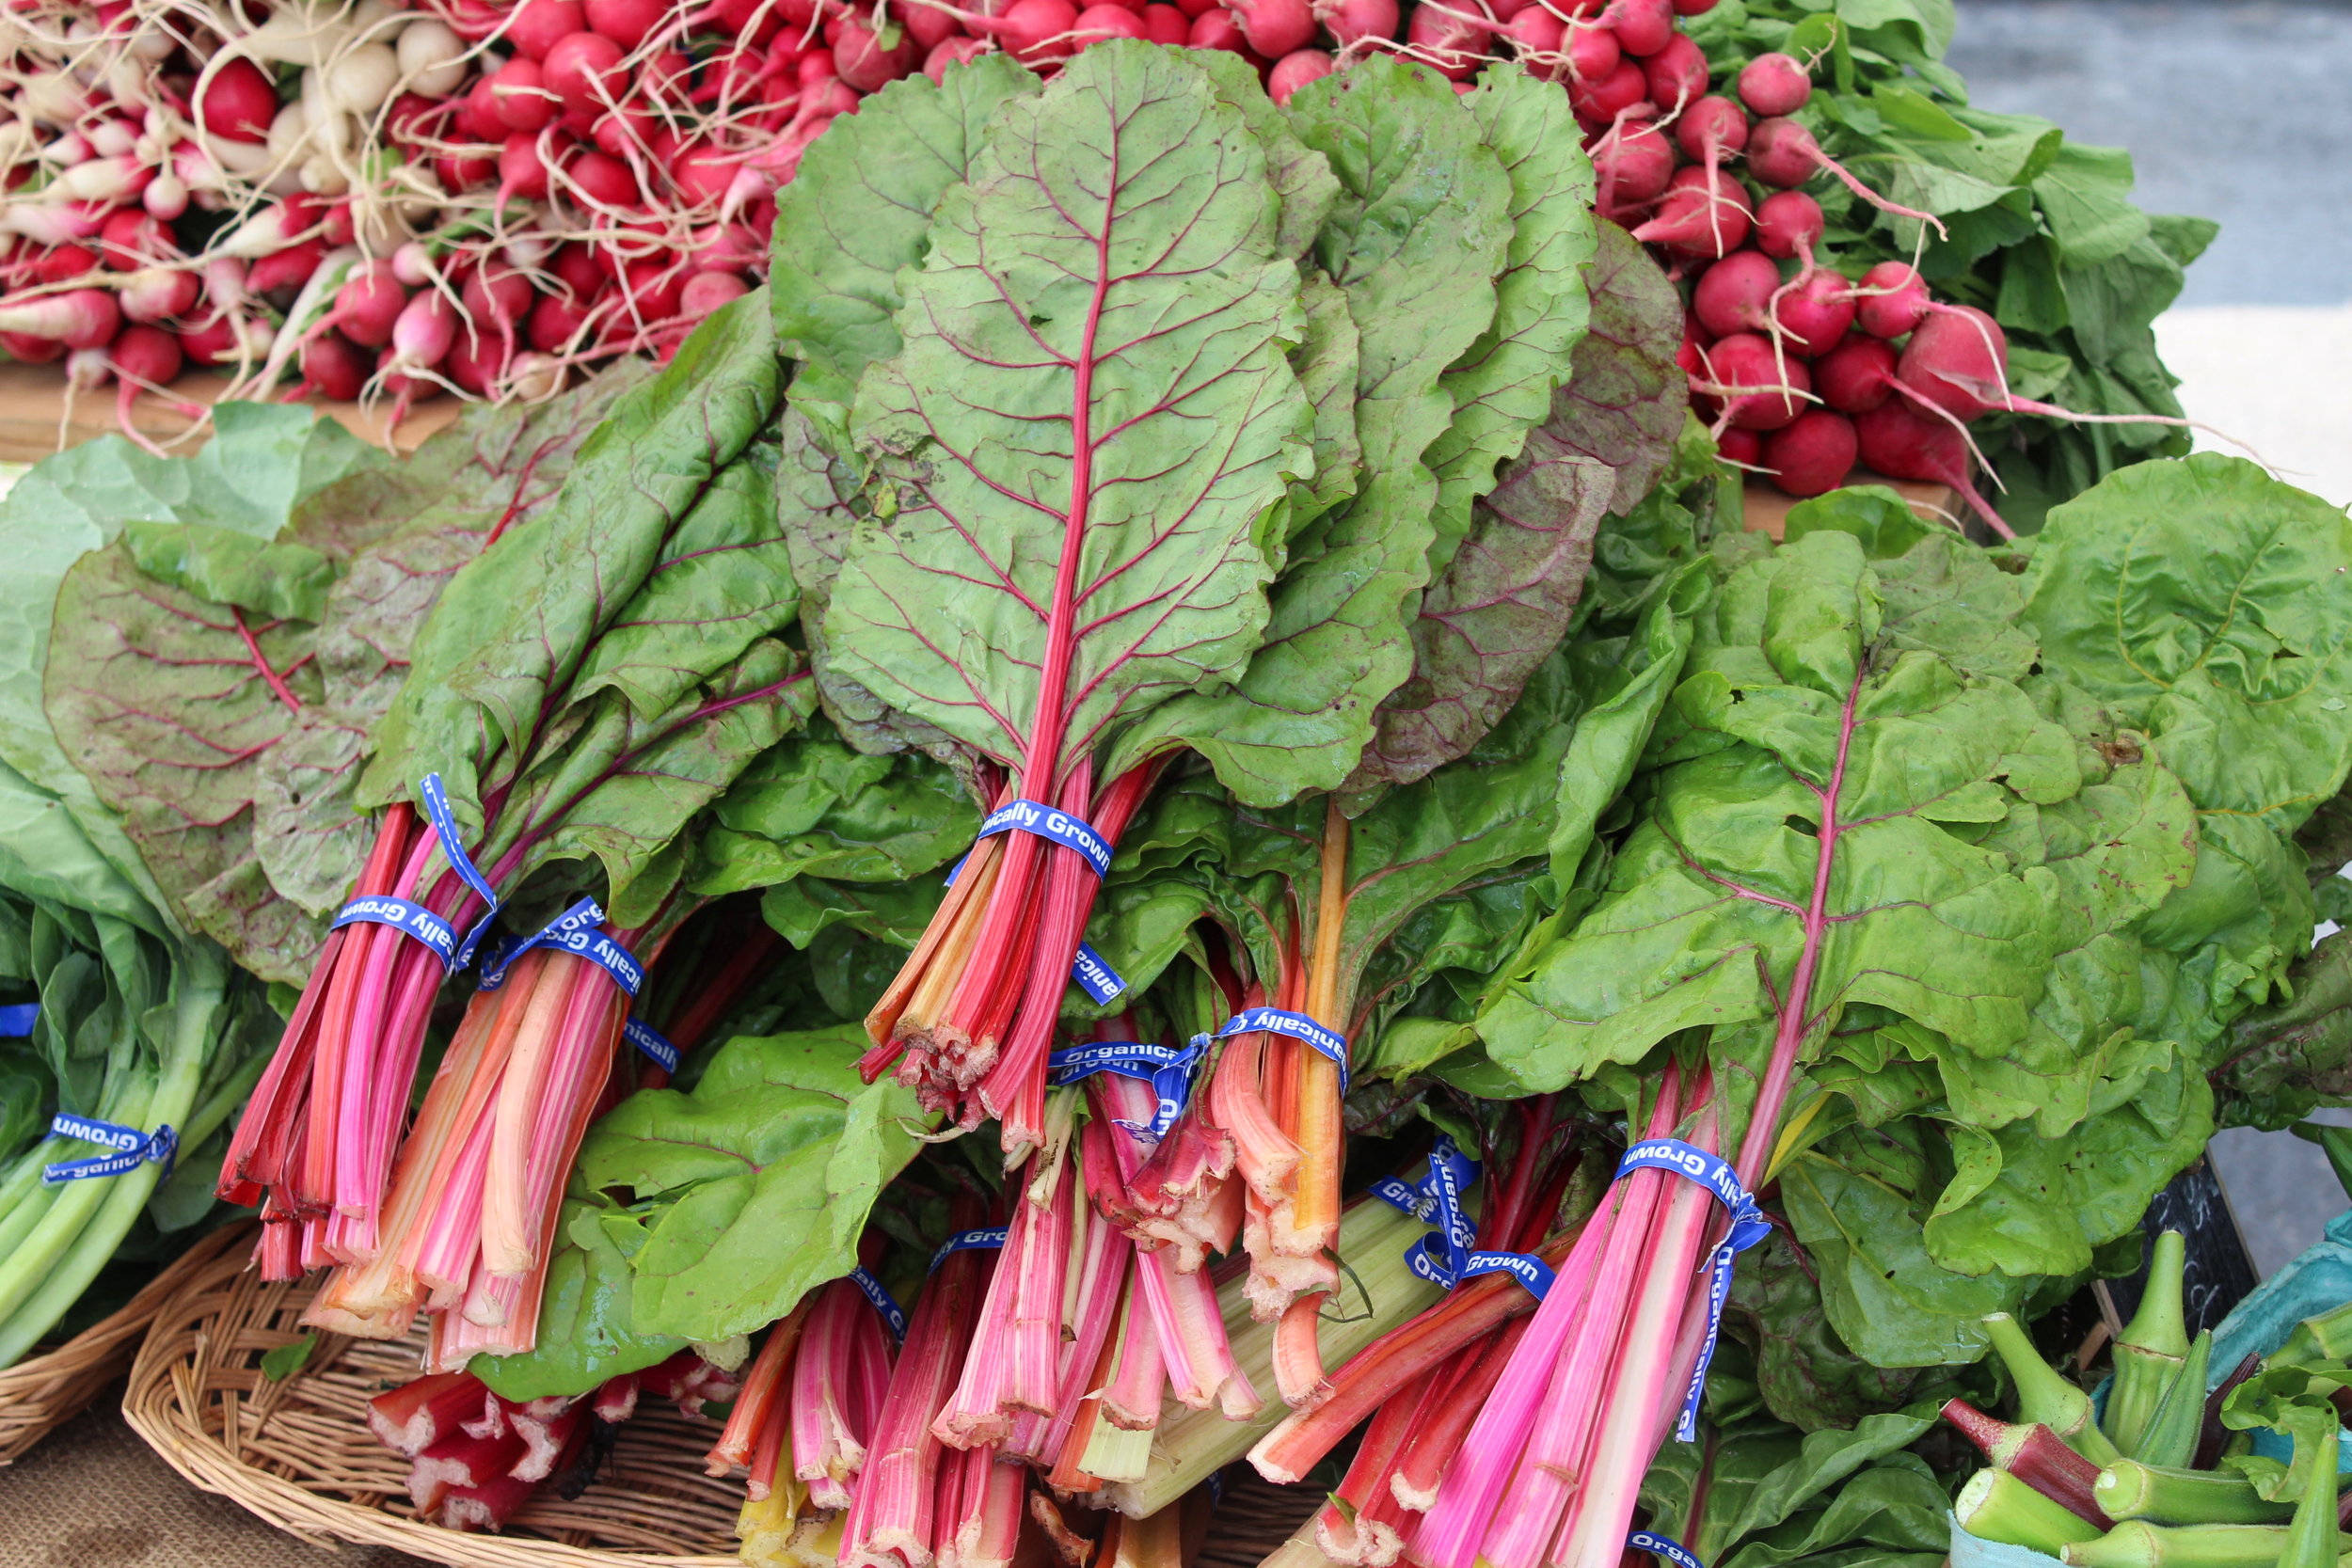 Swiss chard, with its bright stems, adds color to fall containers and gardens. The leaves can be harvested for salads when young, and the stalks are edible, too. Try them in stir-fry. Cut from the outside of the plant with a sharp knife about 1-2" from soil. New growth begins in center of plant. Refrain from cutting the growing point.